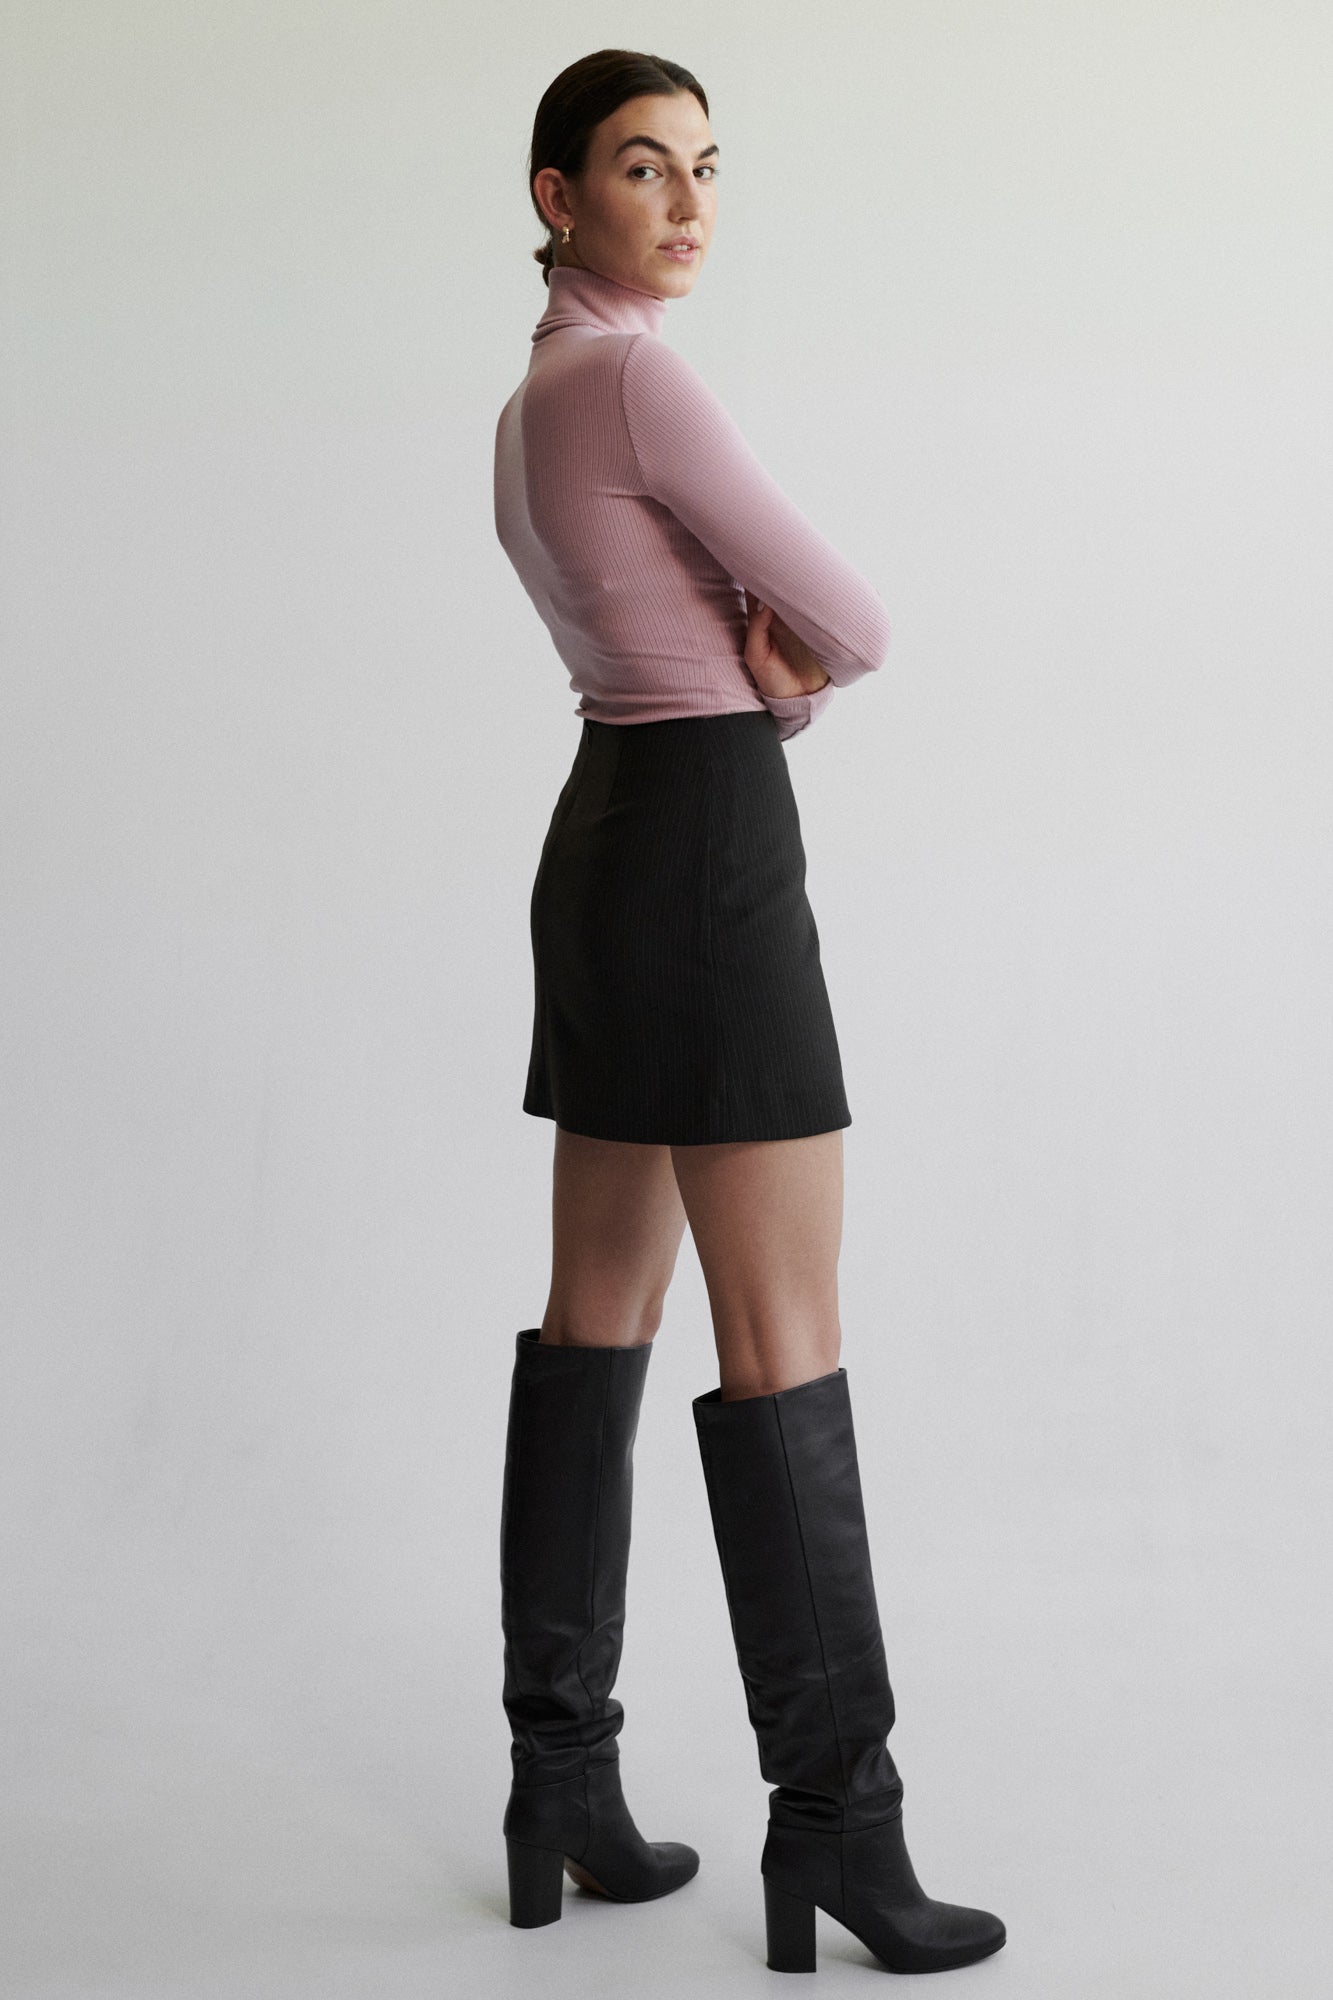 Turtleneck in organic cotton / 15 / 02 / peony pink ?The model is 178 cm tall and wears size XS?